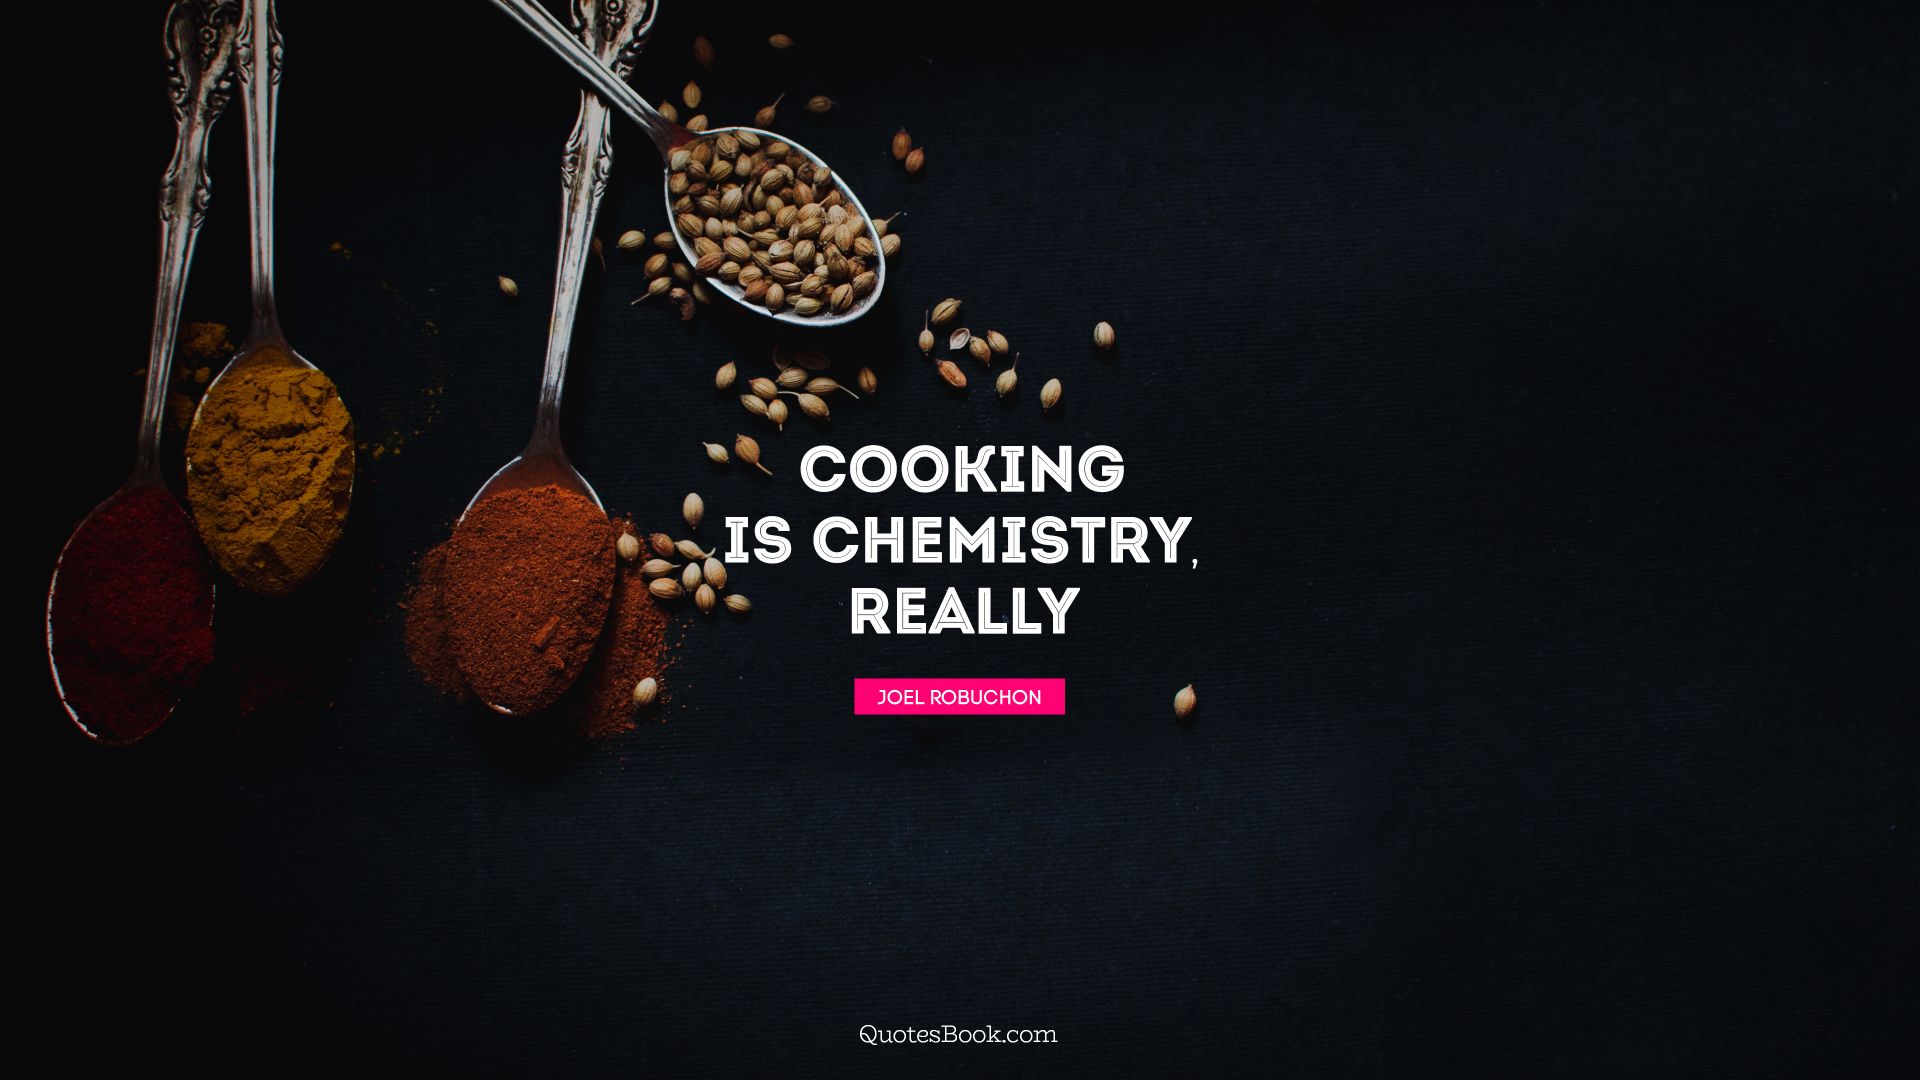 Cooking is chemistry, really. - Quote by Joel Robuchon